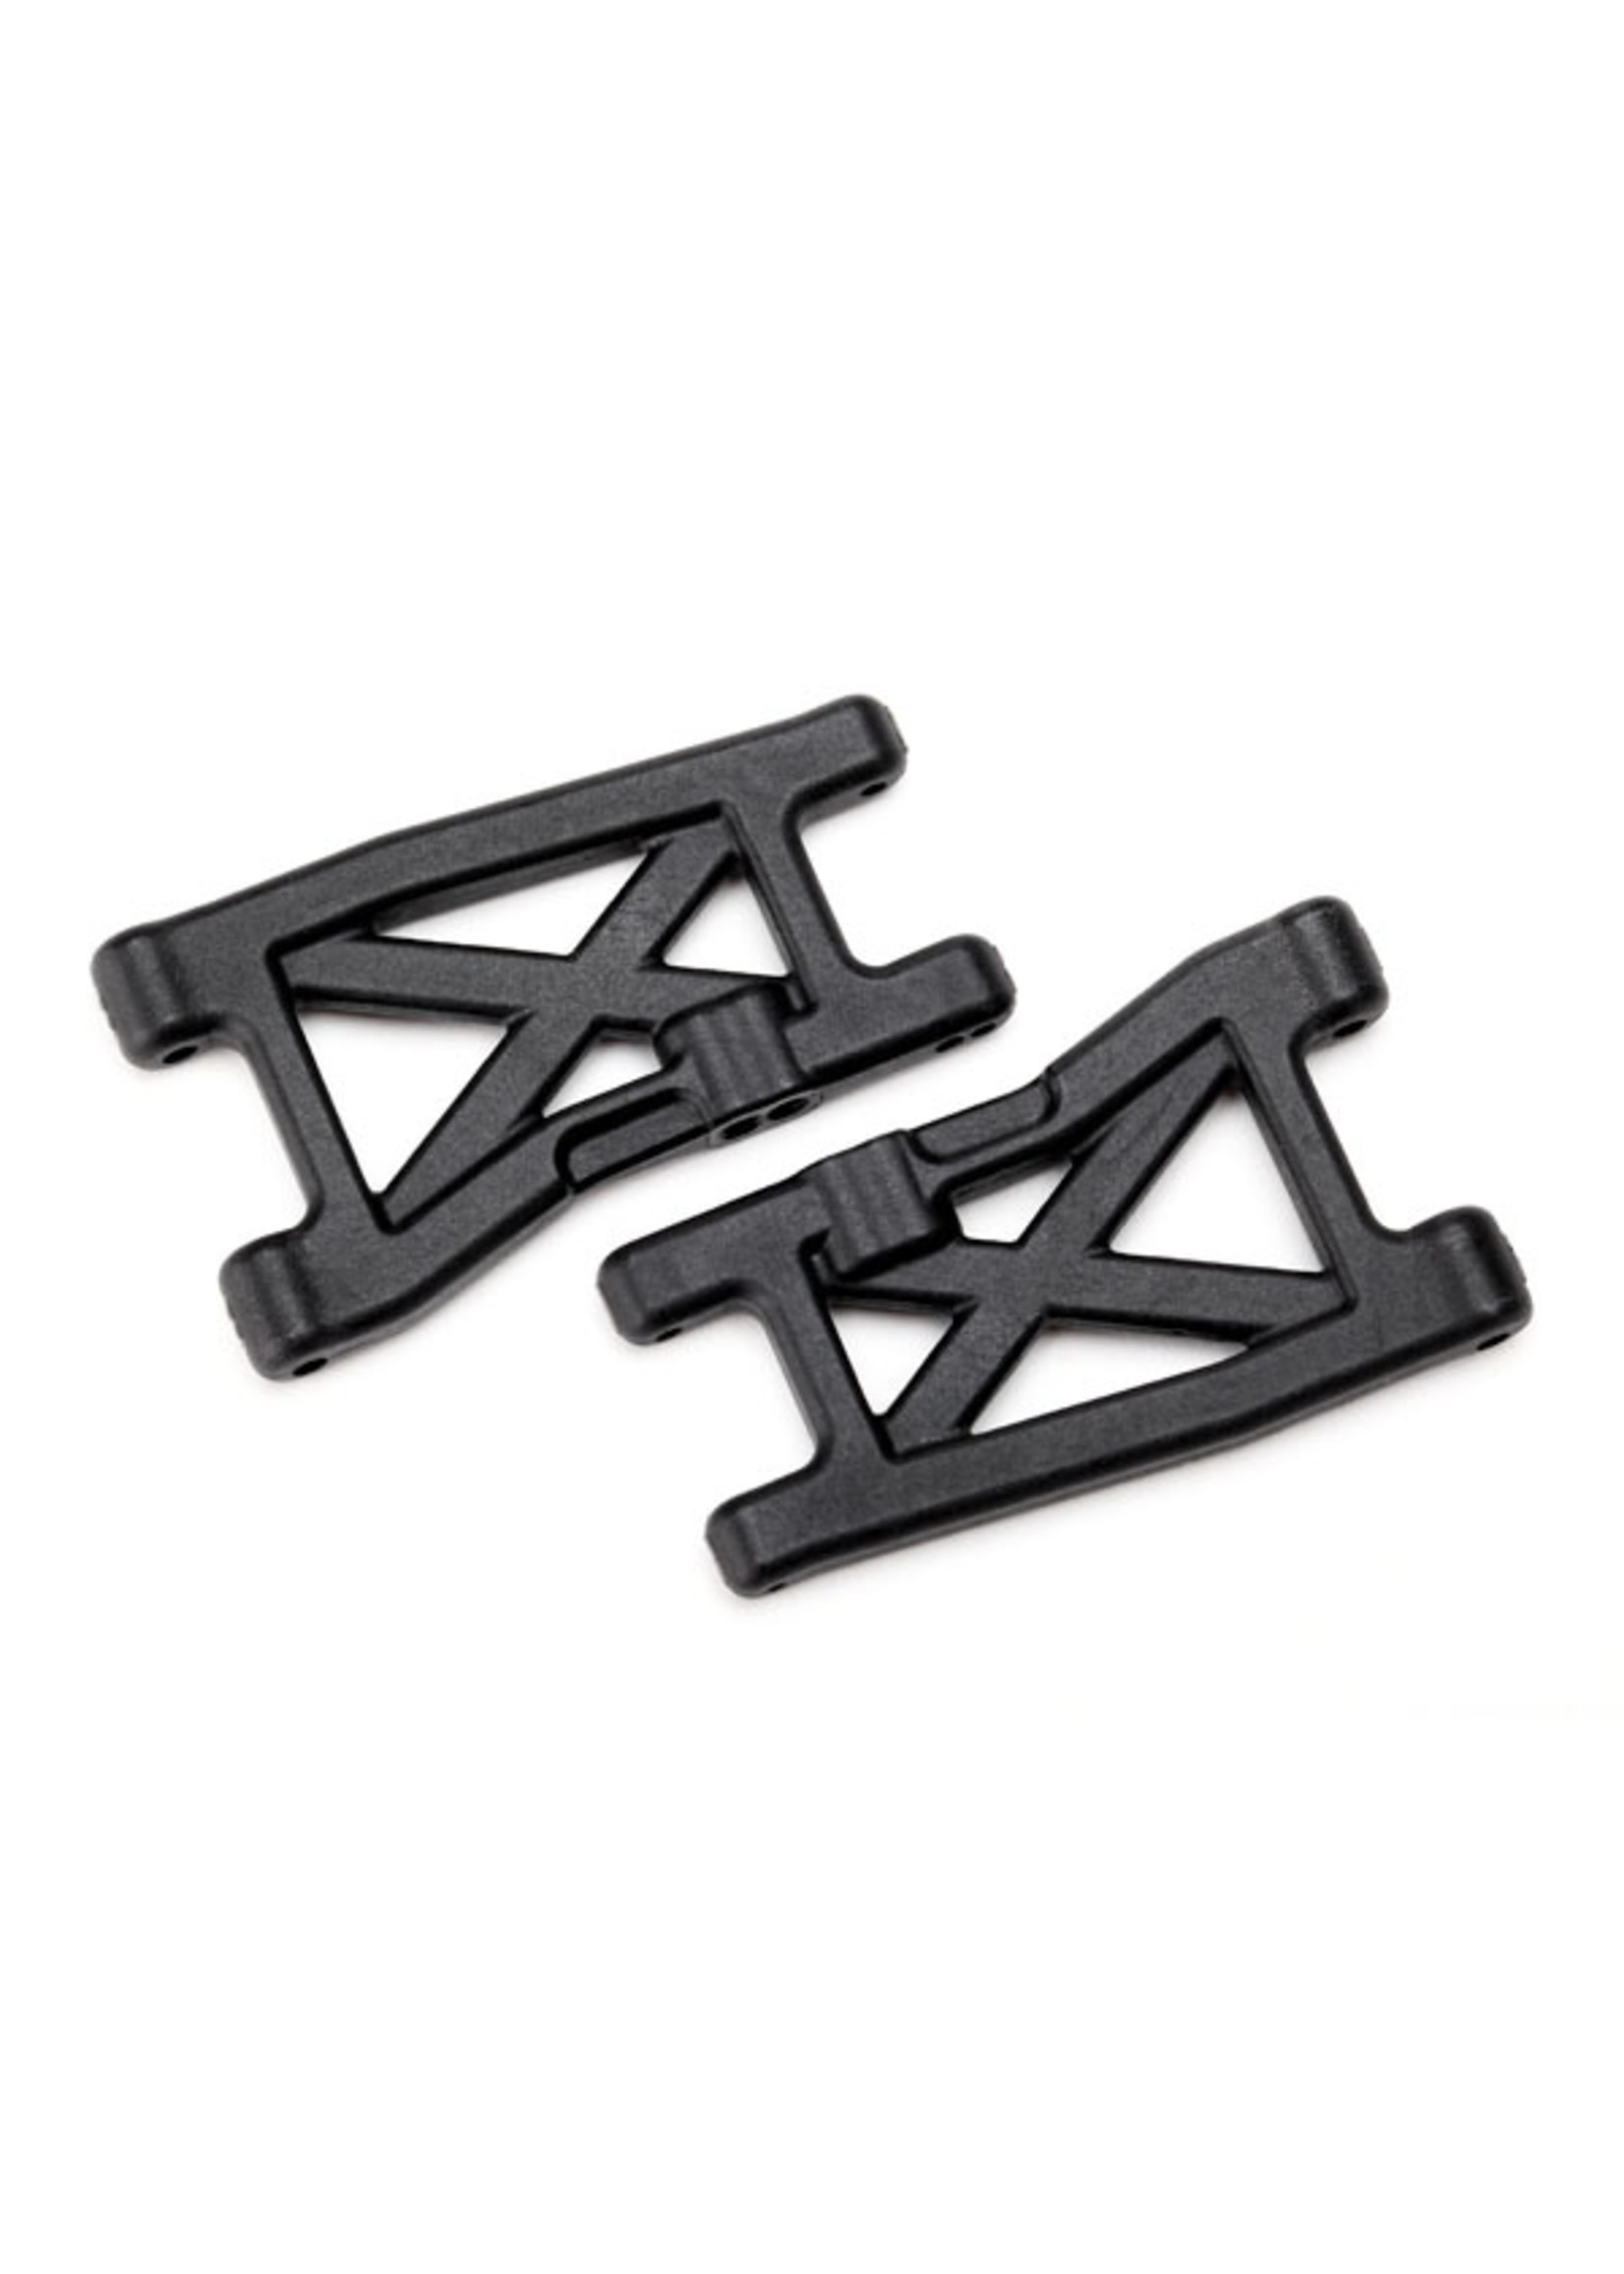 Traxxas 7630 - Suspension Arms - Front/Rear